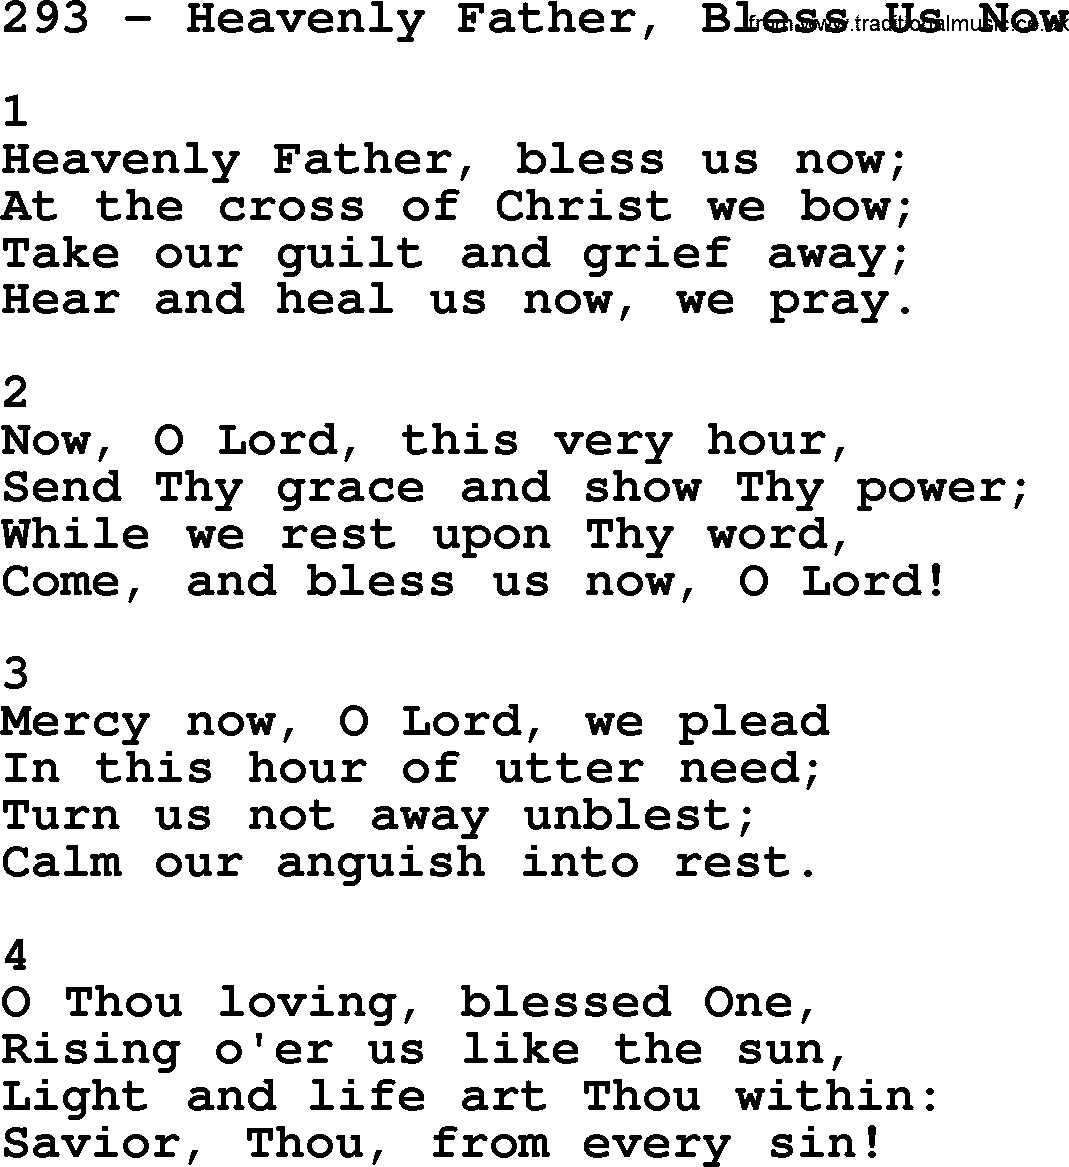 Complete Adventis Hymnal, title: 293-Heavenly Father, Bless Us Now, with lyrics, midi, mp3, powerpoints(PPT) and PDF,